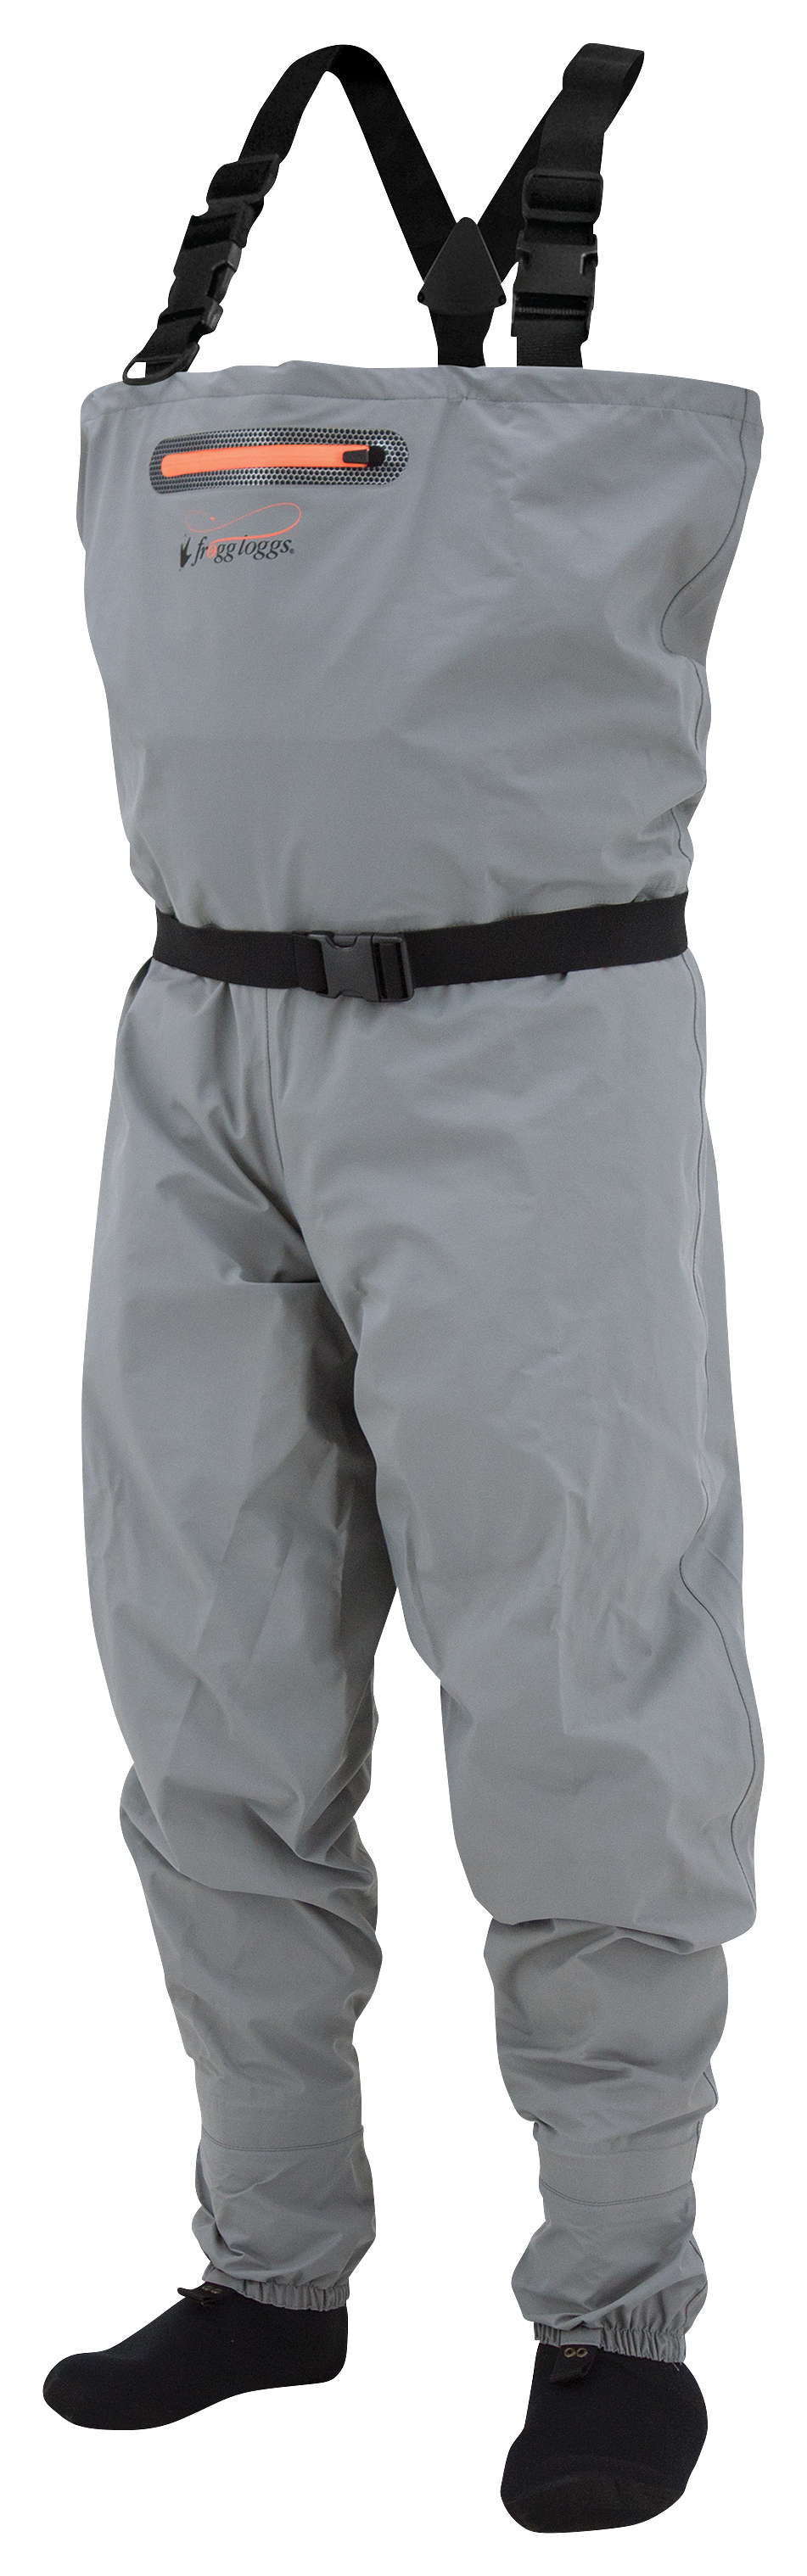 Frogg Toggs Canyon II Stockingfoot Chest Waders for Men - Small